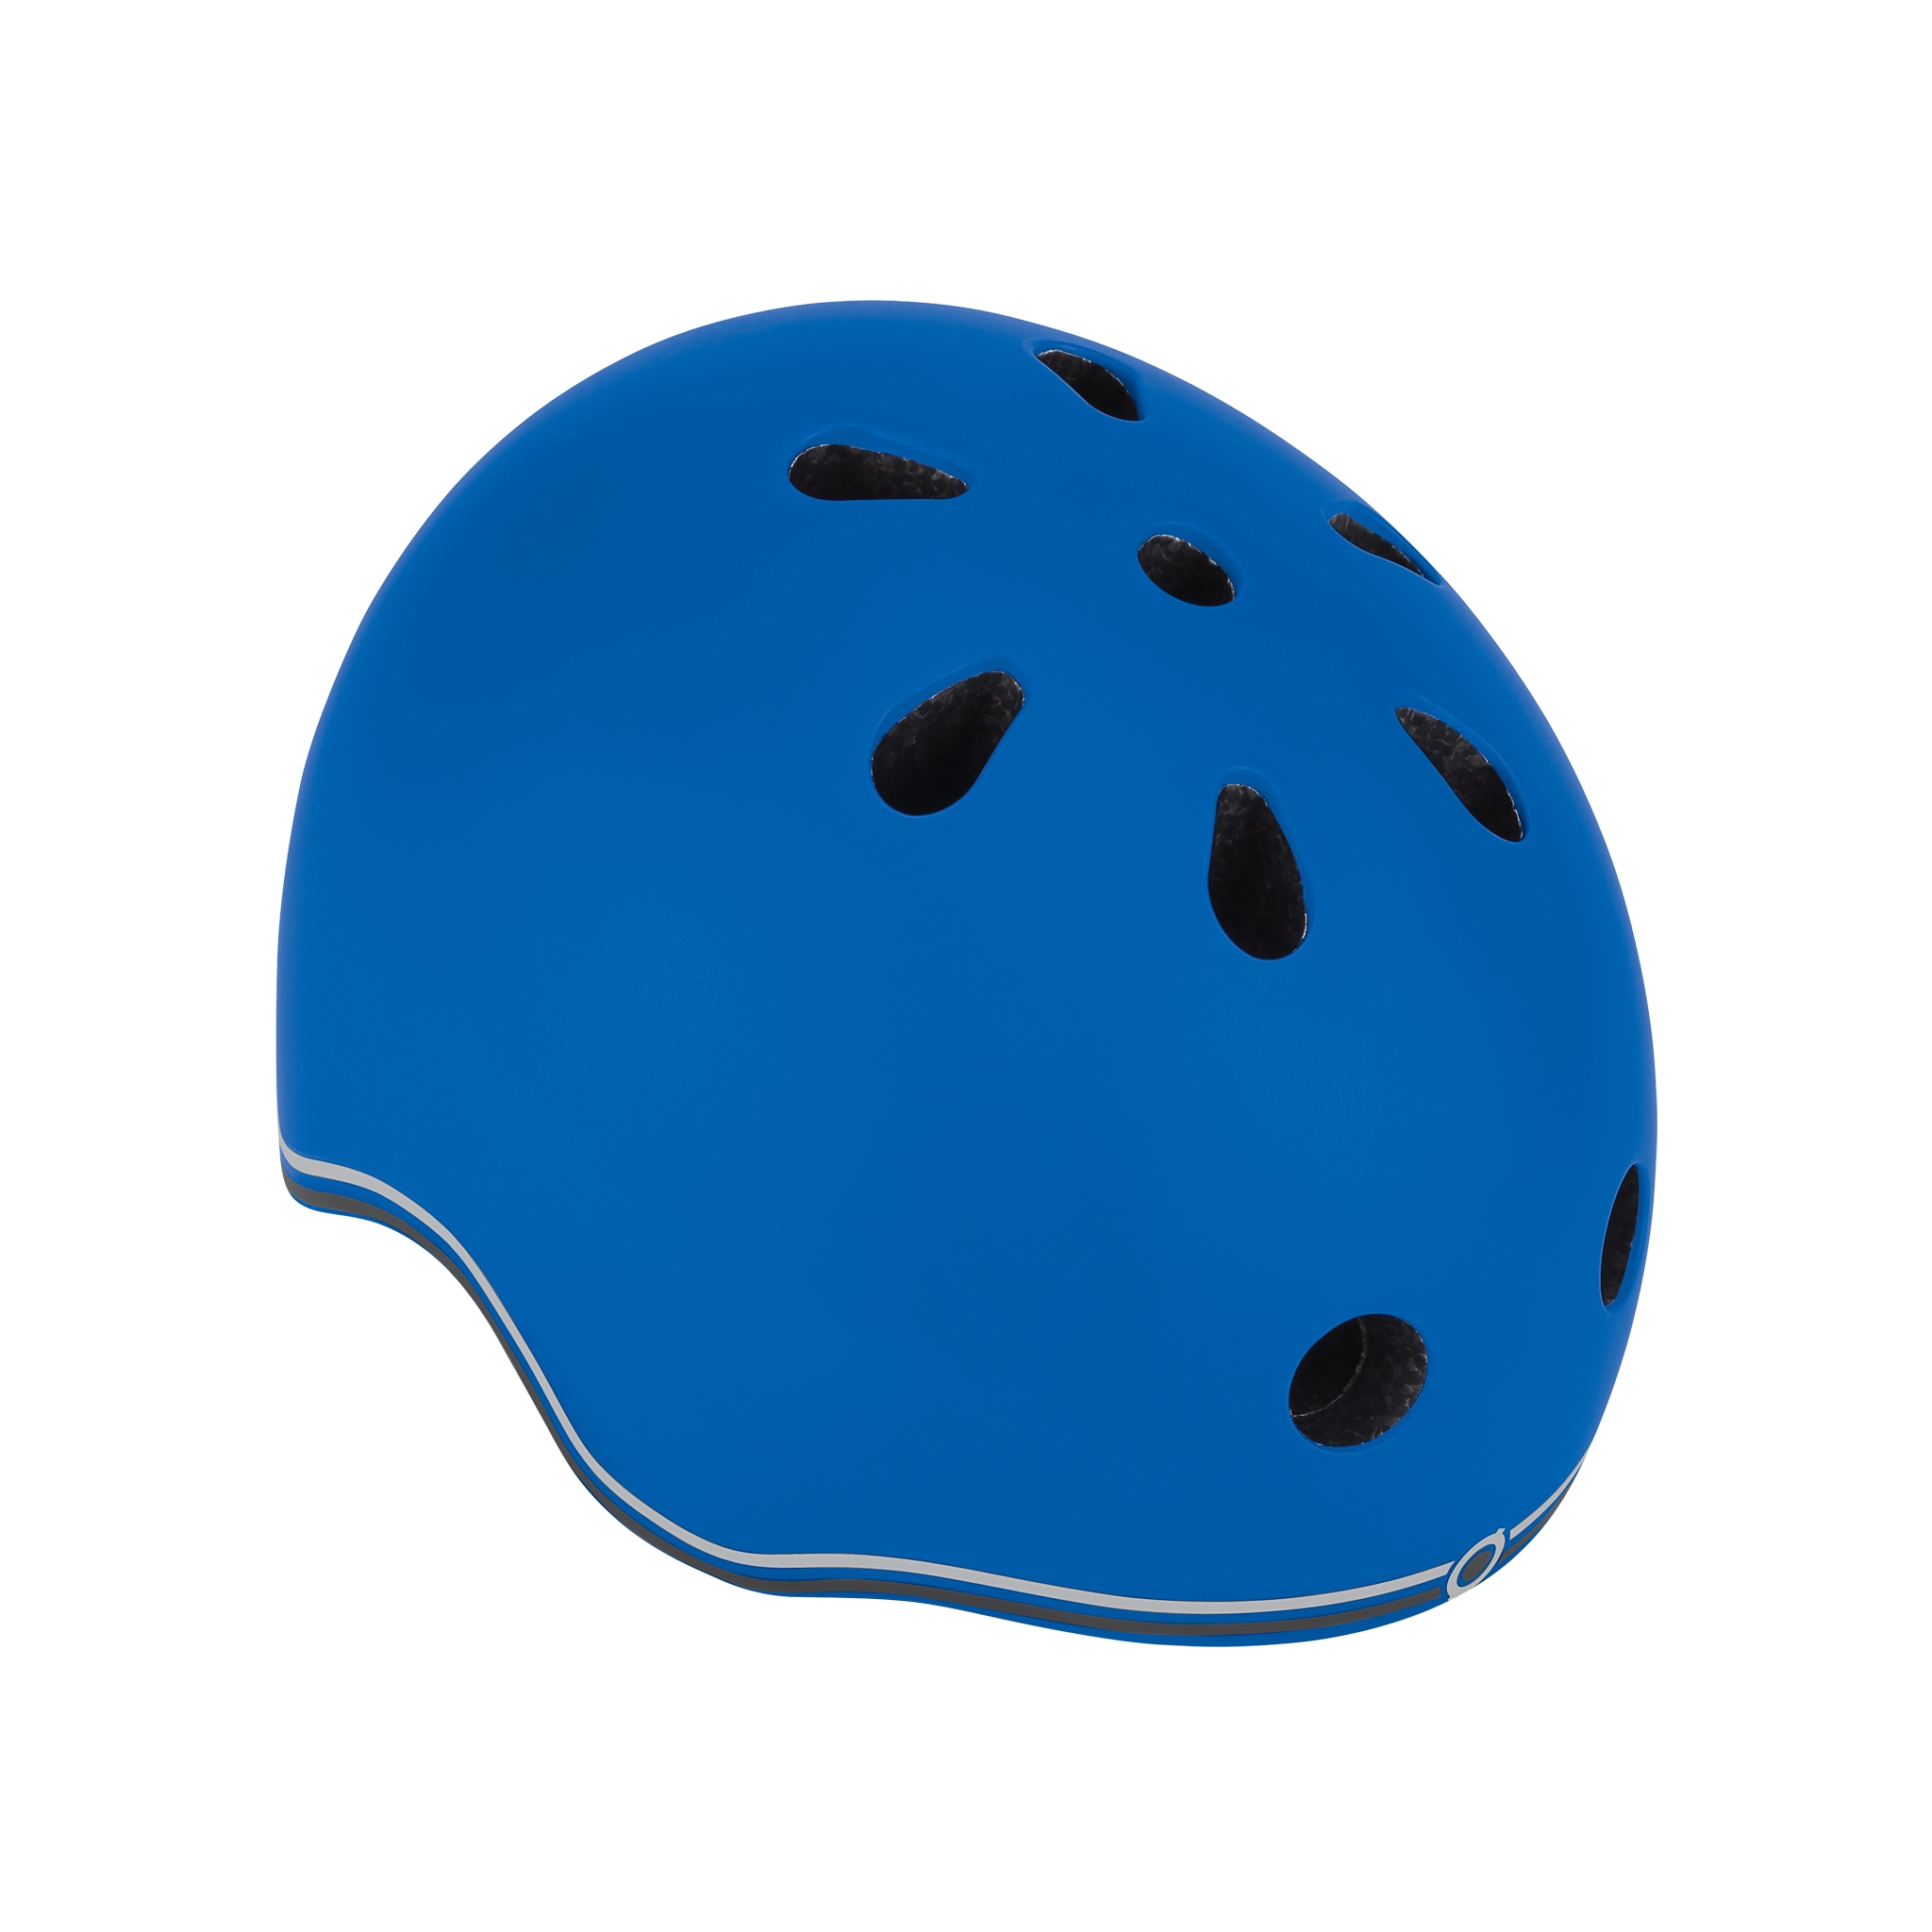 EVO-helmets-scooter-helmets-for-toddlers-in-mold-polycarbonate-outer-shell-navy-blue 0